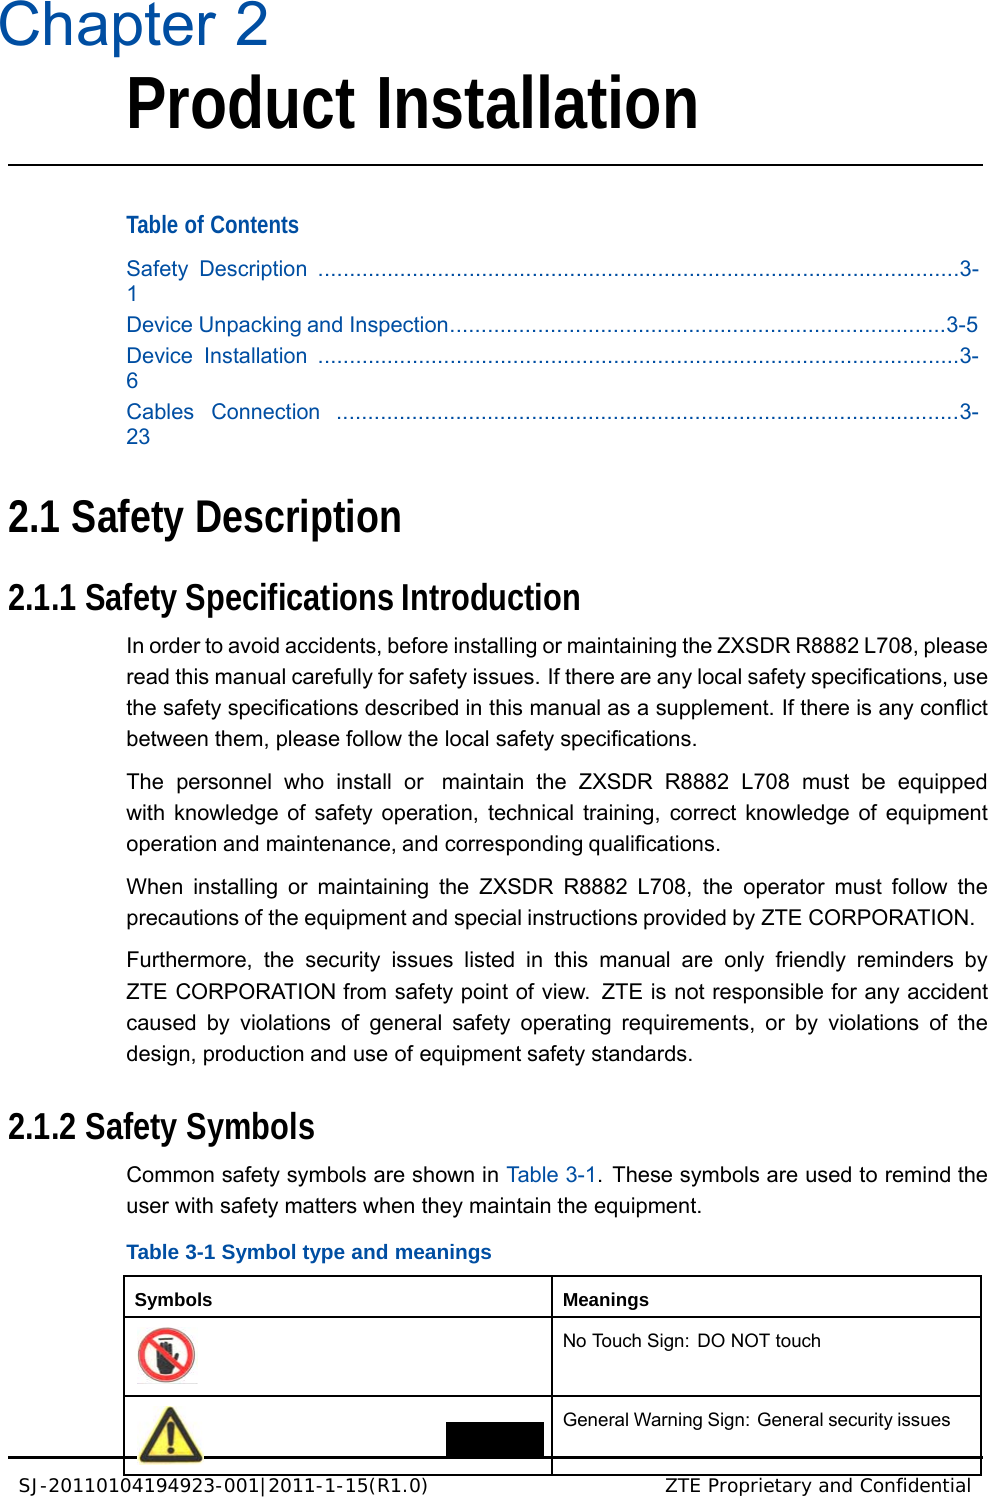 SJ-20110104194923-001|2011-1-15(R1.0) ZTE Proprietary and Confidential   Chapter 2 Product Installation    Table of Contents  Safety Description ......................................................................................................3-1 Device Unpacking and Inspection...............................................................................3-5 Device Installation ......................................................................................................3-6 Cables Connection ...................................................................................................3-23   2.1 Safety Description   2.1.1 Safety Specifications Introduction  In order to avoid accidents, before installing or maintaining the ZXSDR R8882 L708, please read this manual carefully for safety issues. If there are any local safety specifications, use the safety specifications described in this manual as a supplement. If there is any conflict between them, please follow the local safety specifications.  The personnel who install or  maintain the ZXSDR R8882 L708 must be equipped with knowledge of safety operation, technical training, correct knowledge of equipment operation and maintenance, and corresponding qualifications.  When installing or maintaining the ZXSDR R8882 L708, the operator must follow the precautions of the equipment and special instructions provided by ZTE CORPORATION.  Furthermore, the security issues listed in this manual are only friendly reminders by ZTE CORPORATION from safety point of view.  ZTE is not responsible for any accident caused by violations of general safety operating requirements, or by violations of the design, production and use of equipment safety standards.   2.1.2 Safety Symbols  Common safety symbols are shown in Table 3-1.  These symbols are used to remind the user with safety matters when they maintain the equipment.  Table 3-1 Symbol type and meanings   Symbols Meanings  No Touch Sign: DO NOT touch  General Warning Sign: General security issues 